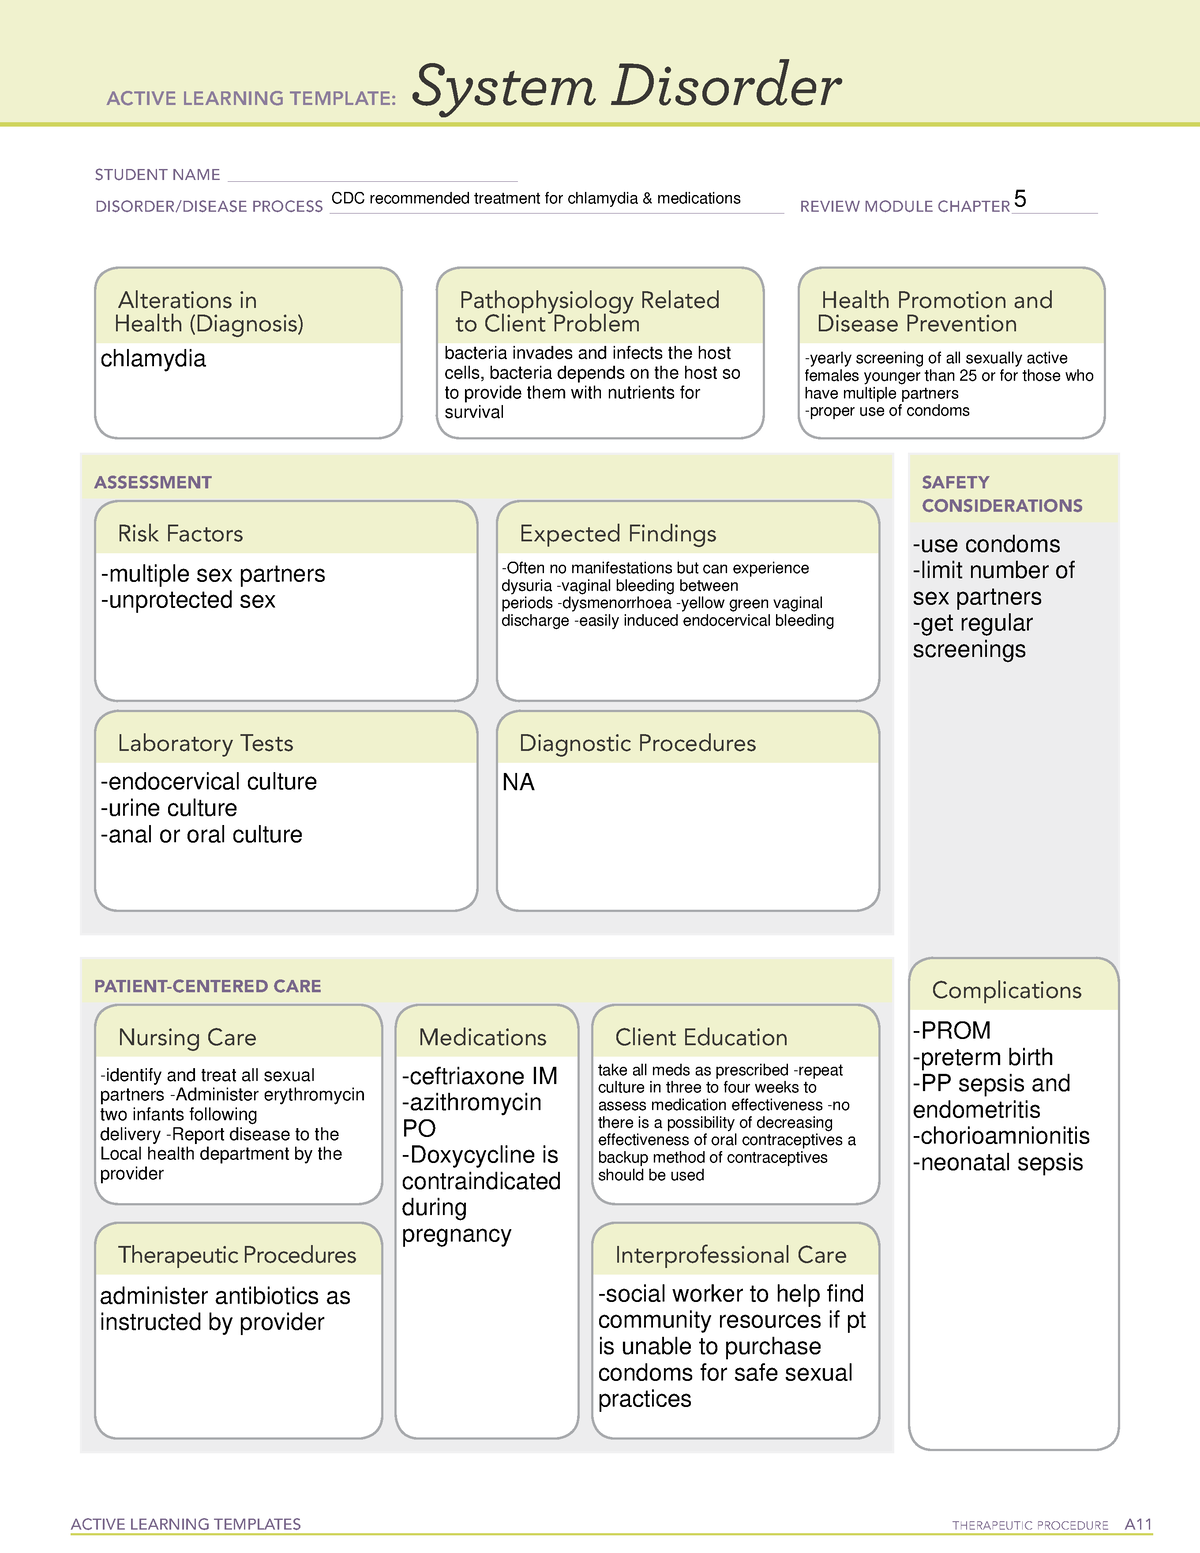 11. ATI Rem A chlamydia-meds - ACTIVE LEARNING TEMPLATES THERAPEUTIC ...